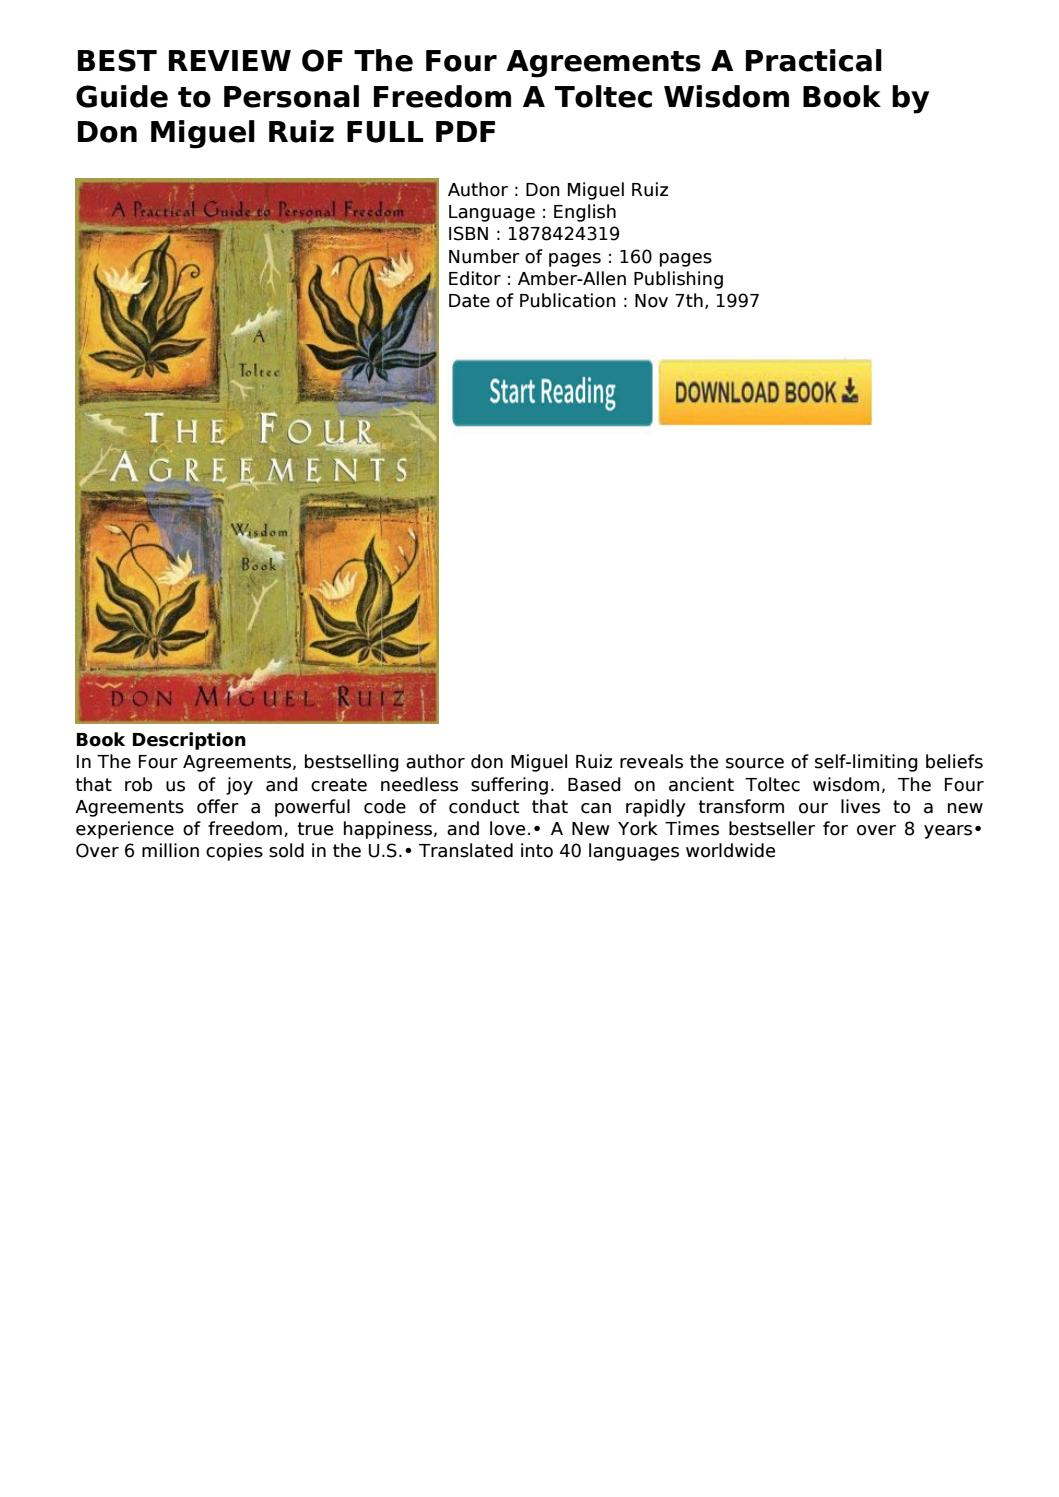 Four Agreements Book Free Download Best Review Of The Four Agreements A Practical Guide To Personal